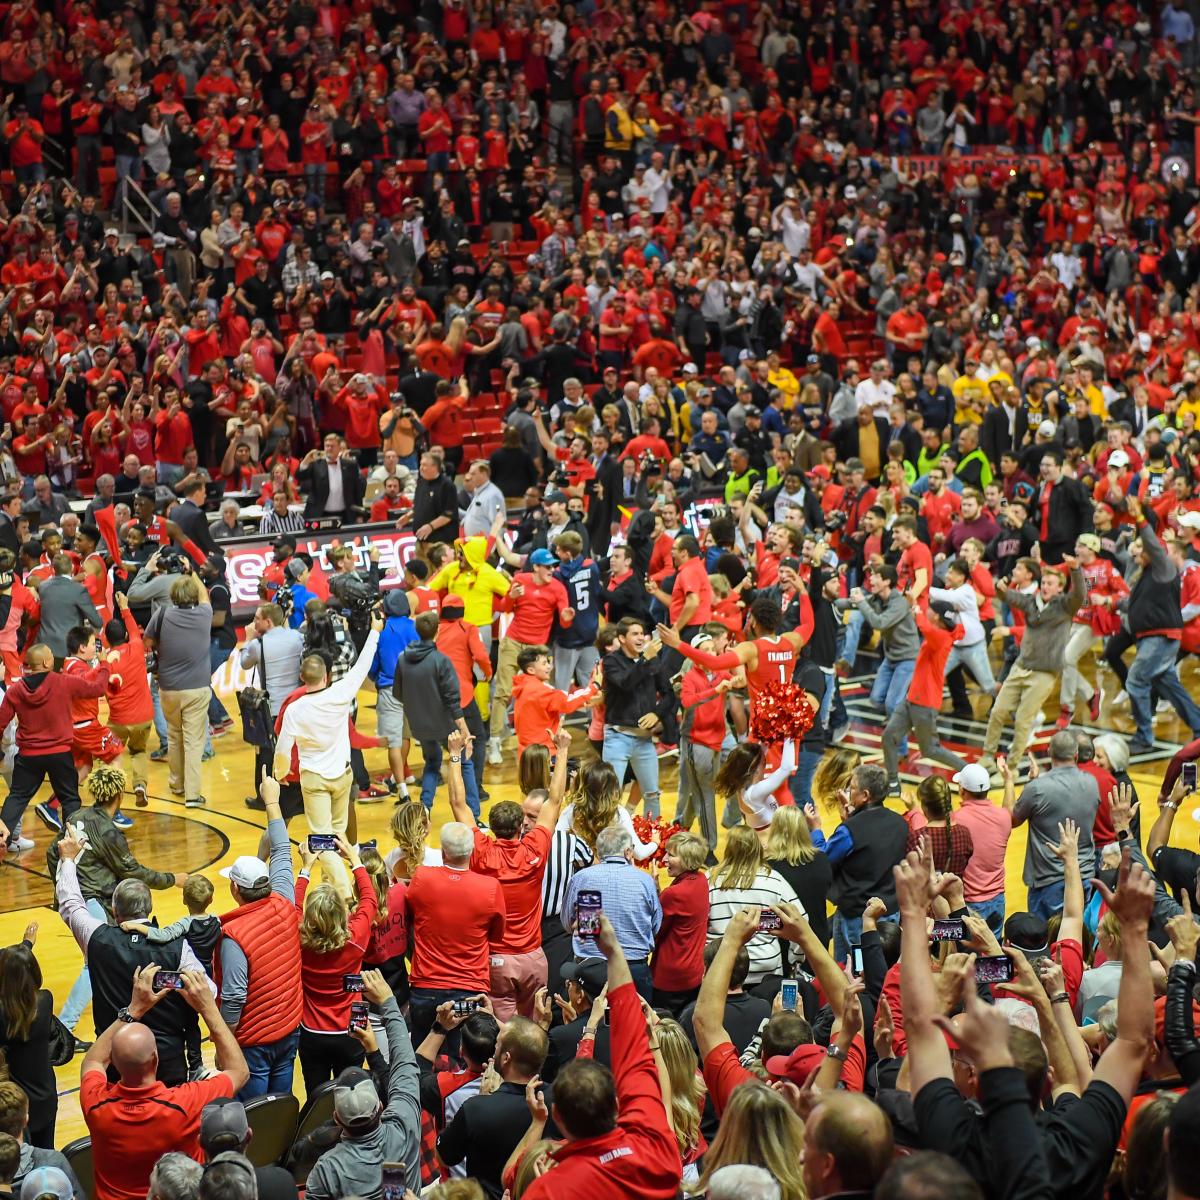 WVU Player Appears to Throw Punch at Fan After Texas Tech Crowd Stormed Court